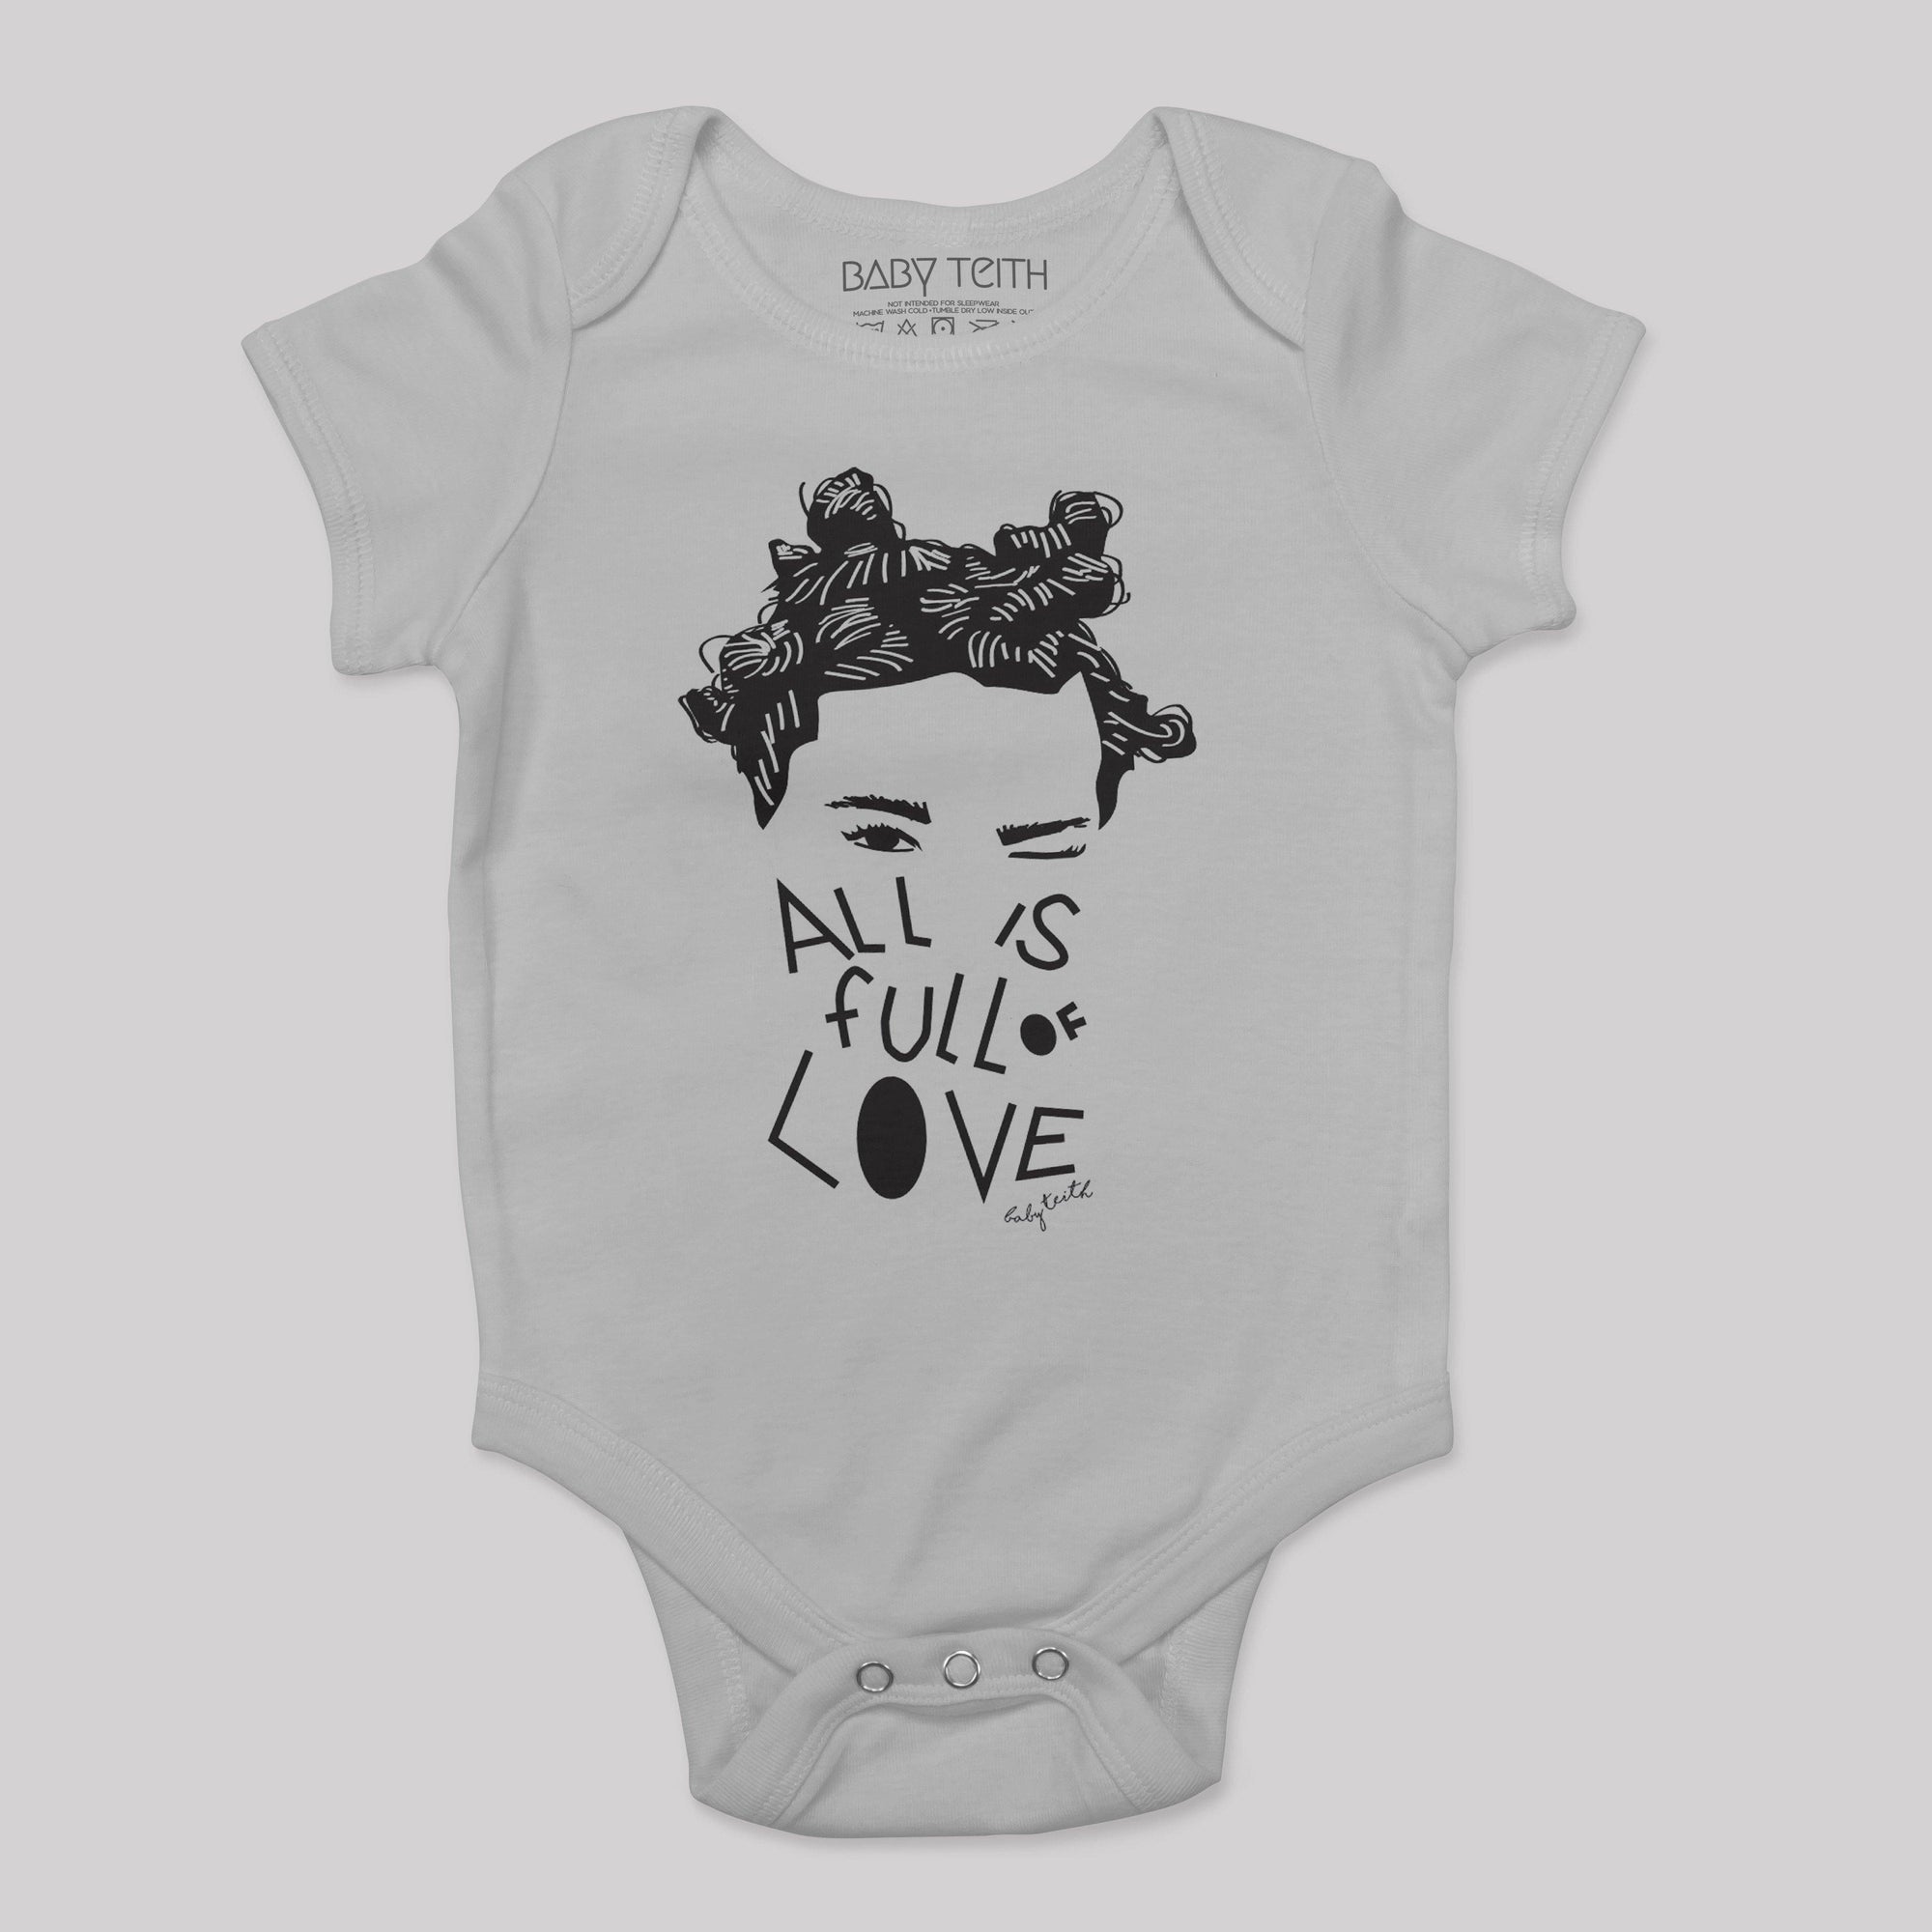 "All is Full of Love" Bodysuit - Baby Teith